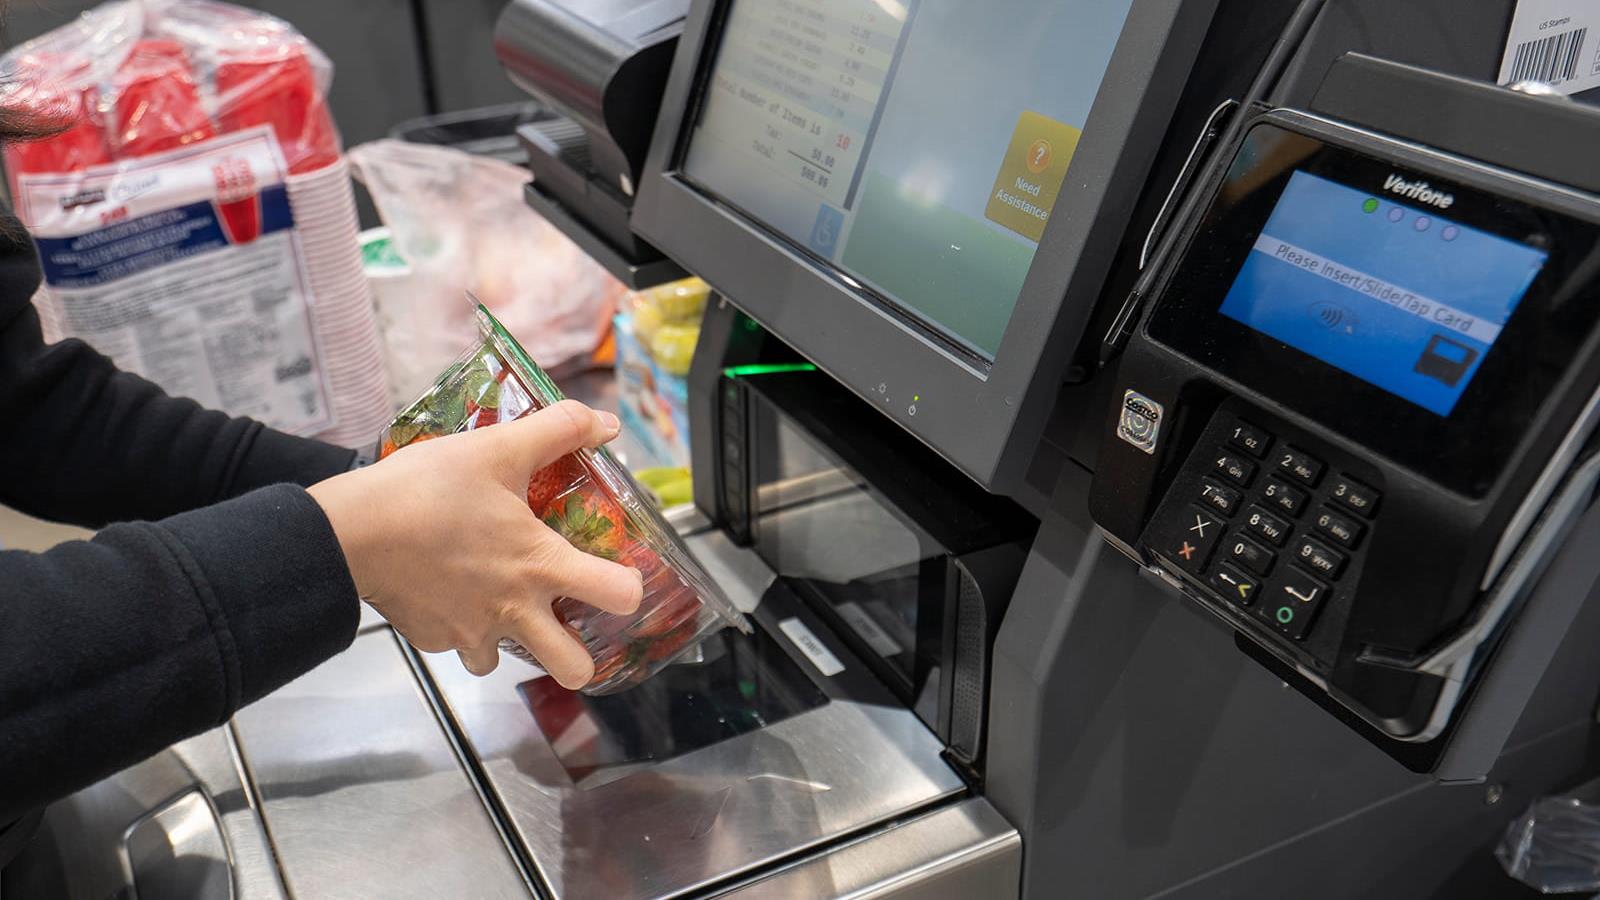 a person scans a carton of strawberries at a self-checkout in a grocery store